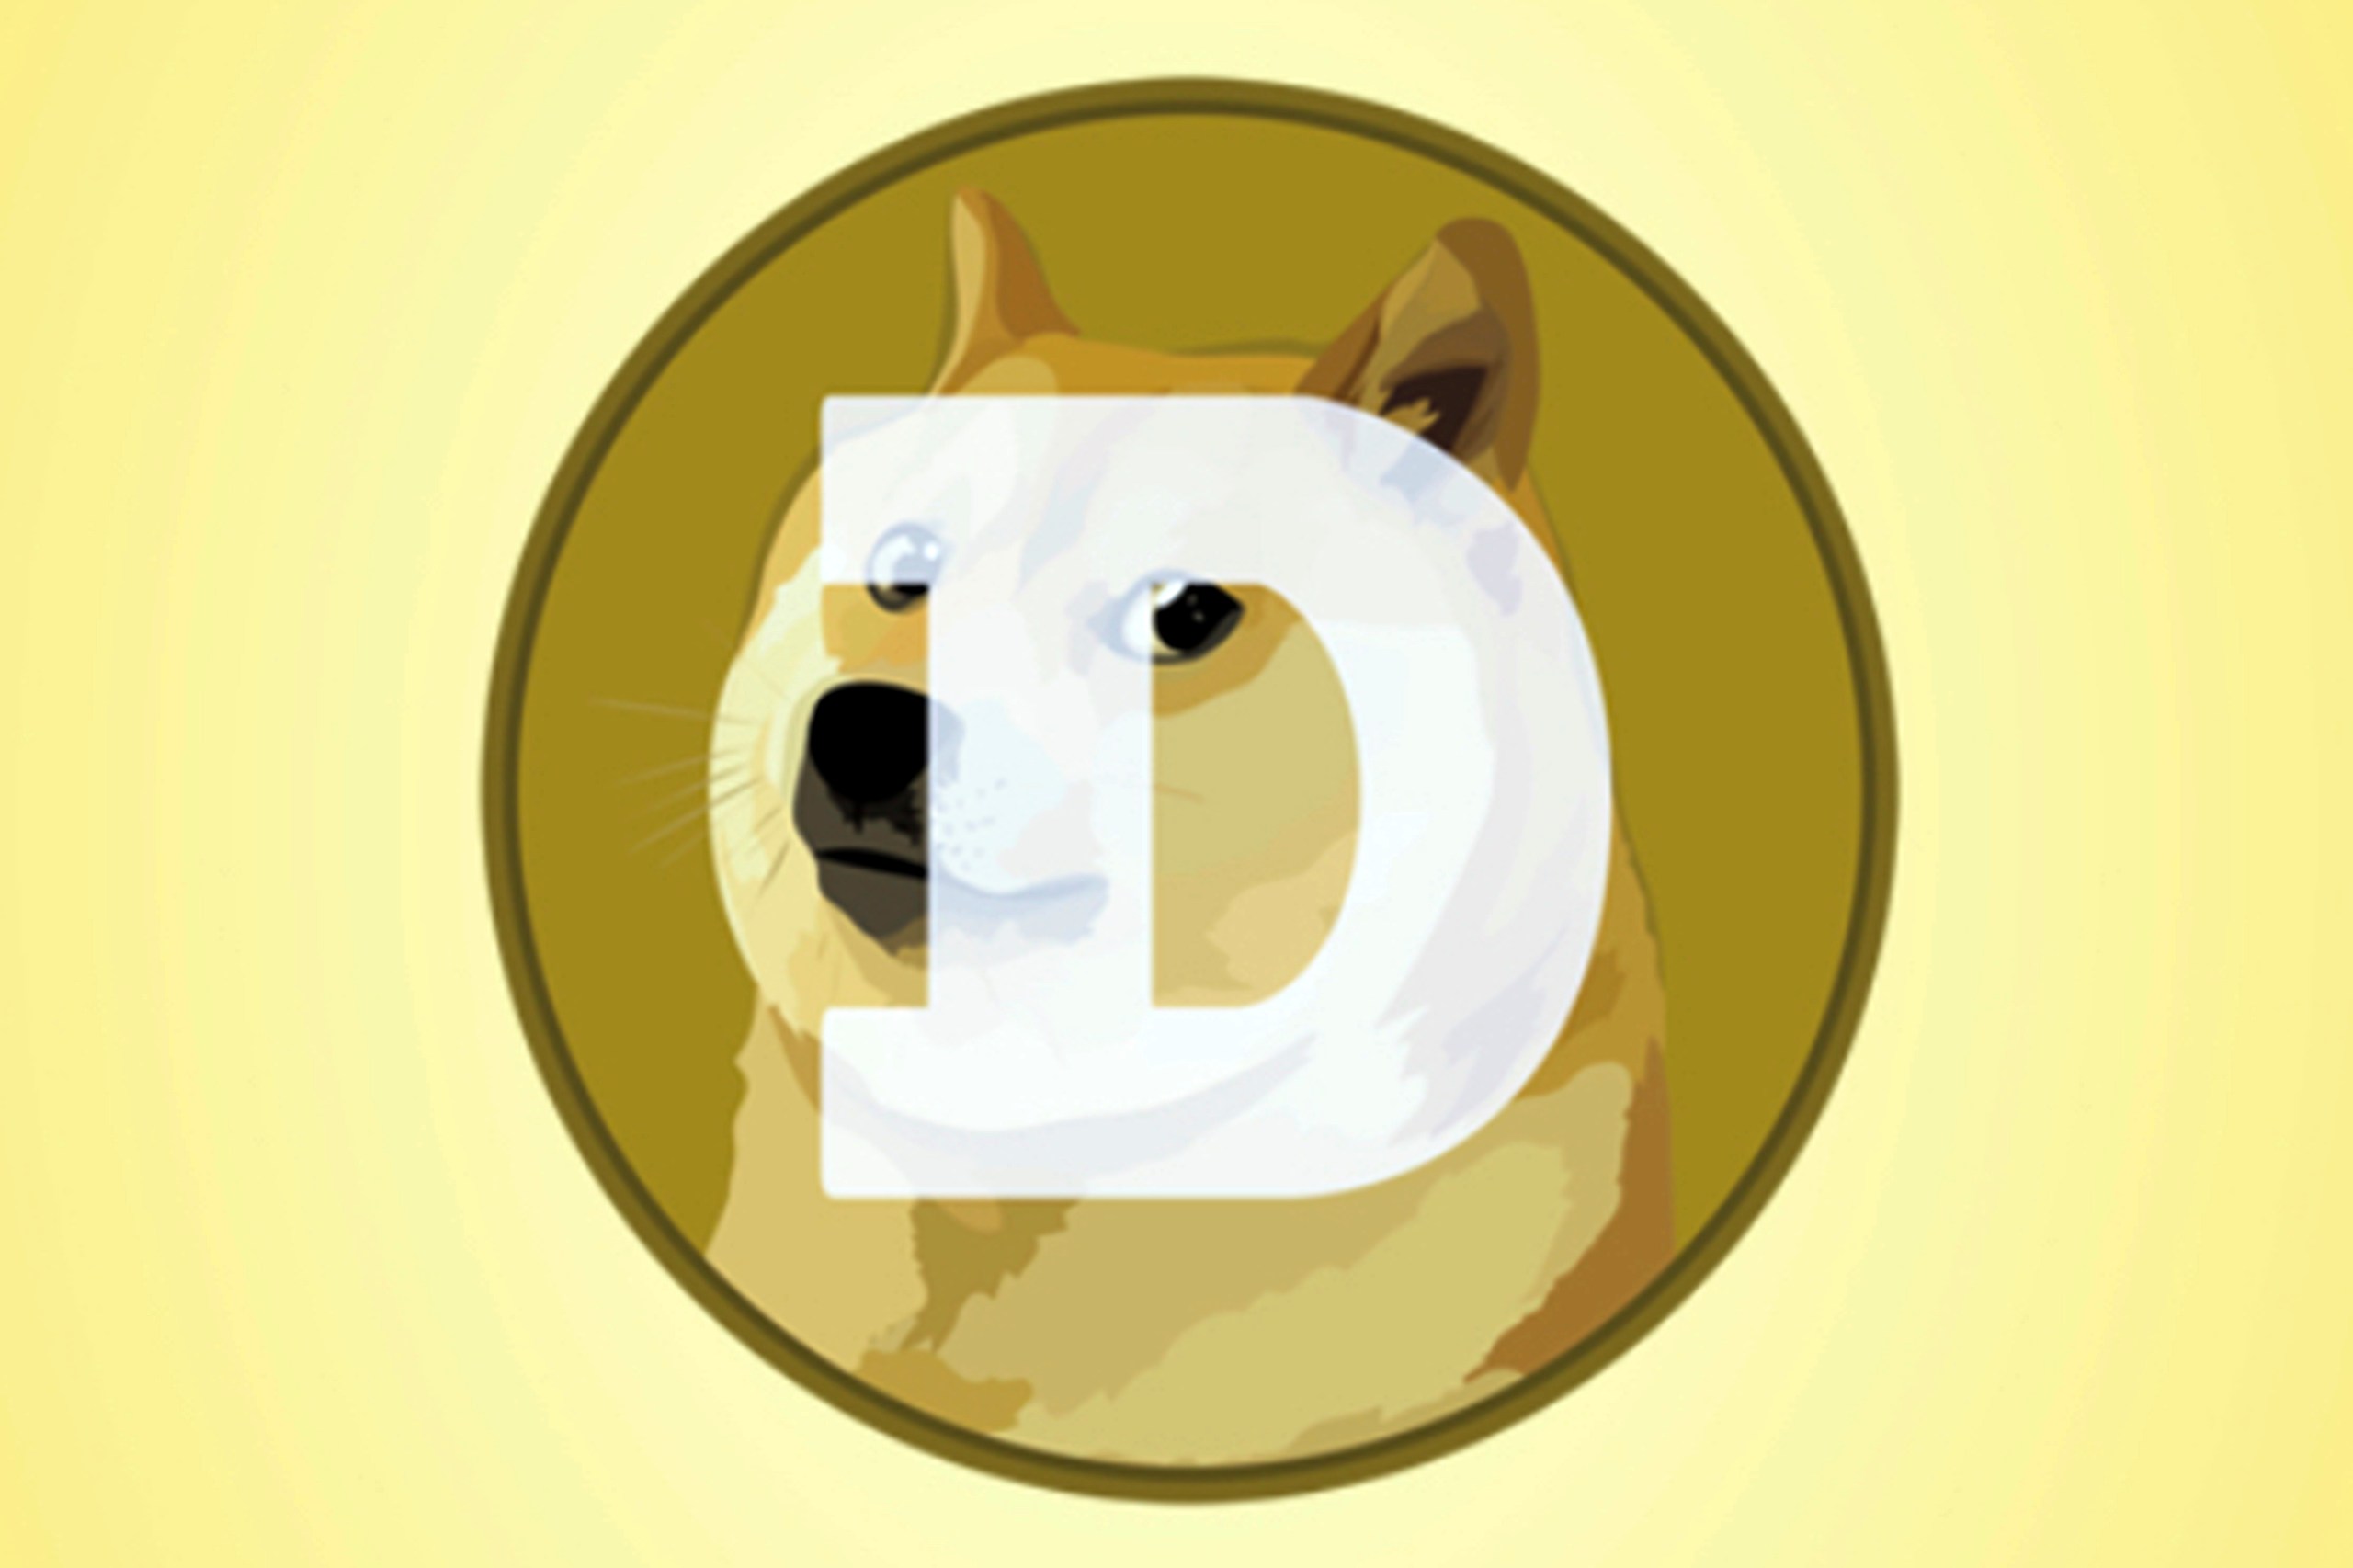 Why is Twitter’s logo replaced with a Doge emoji?